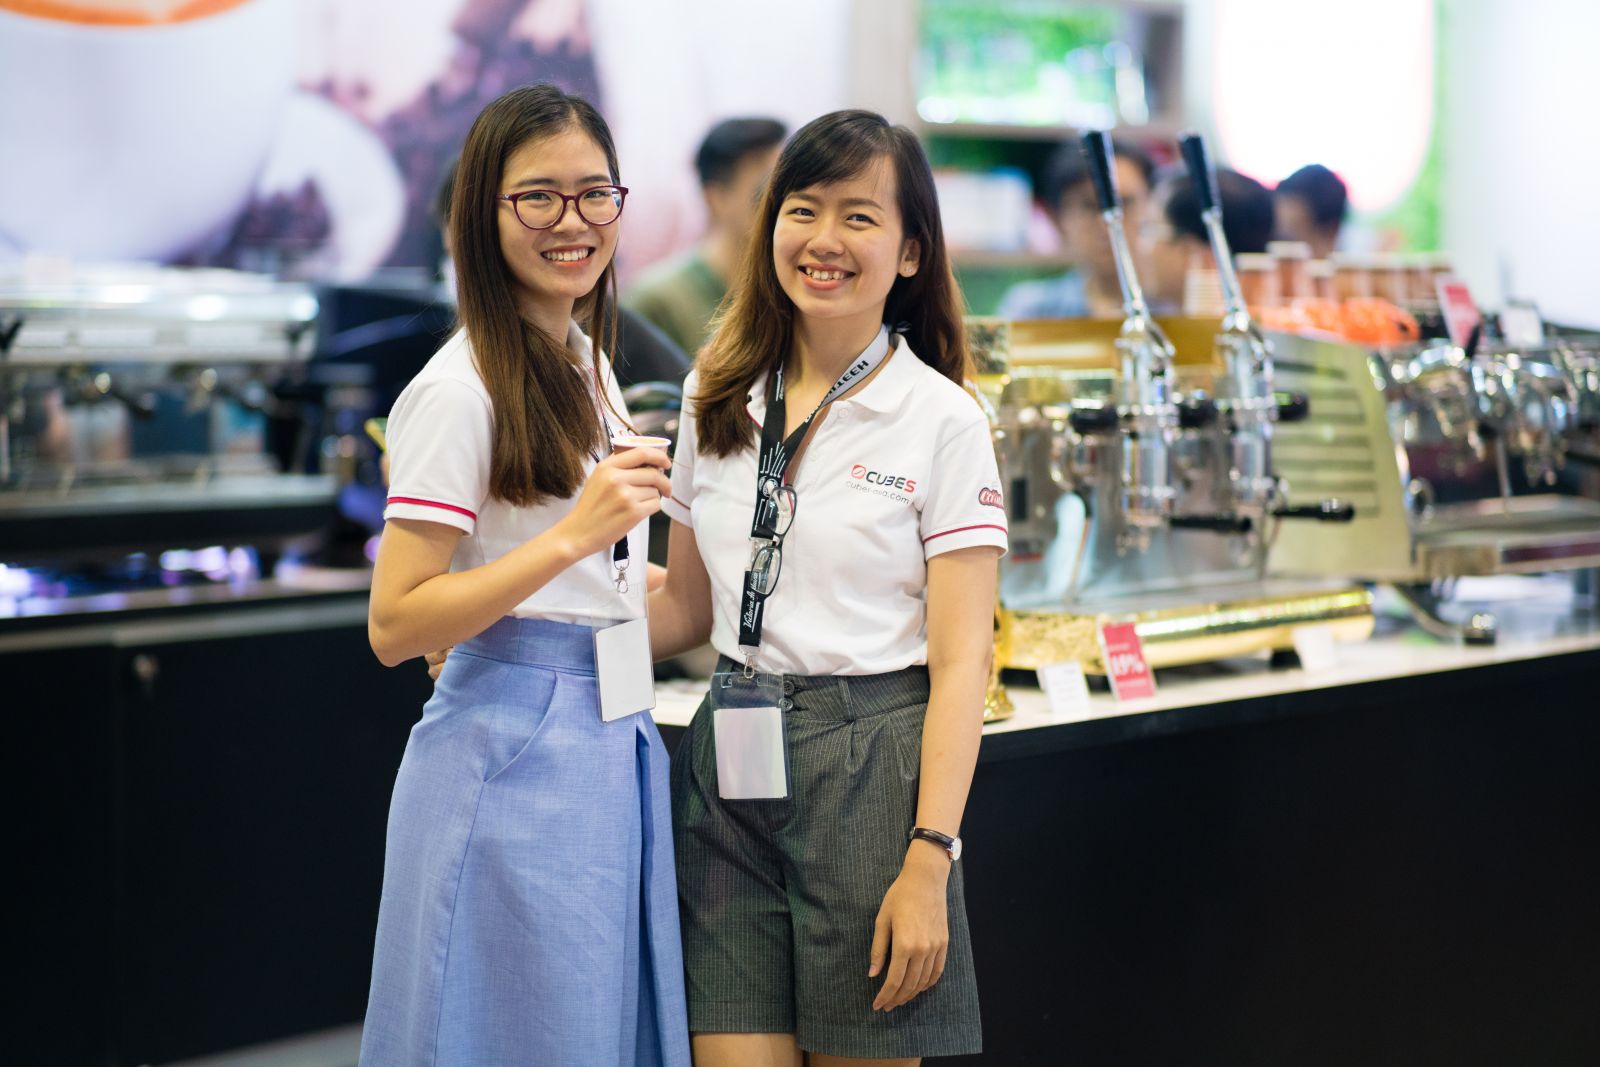 CUBES ASIA WOULD LIKE TO SAY THANK YOU TO ALL CUSTOMERS FOR VISITING OUR BOOTH IN THE COFFEE EXPO VIETNAM 2017 (1st – 3rd June)